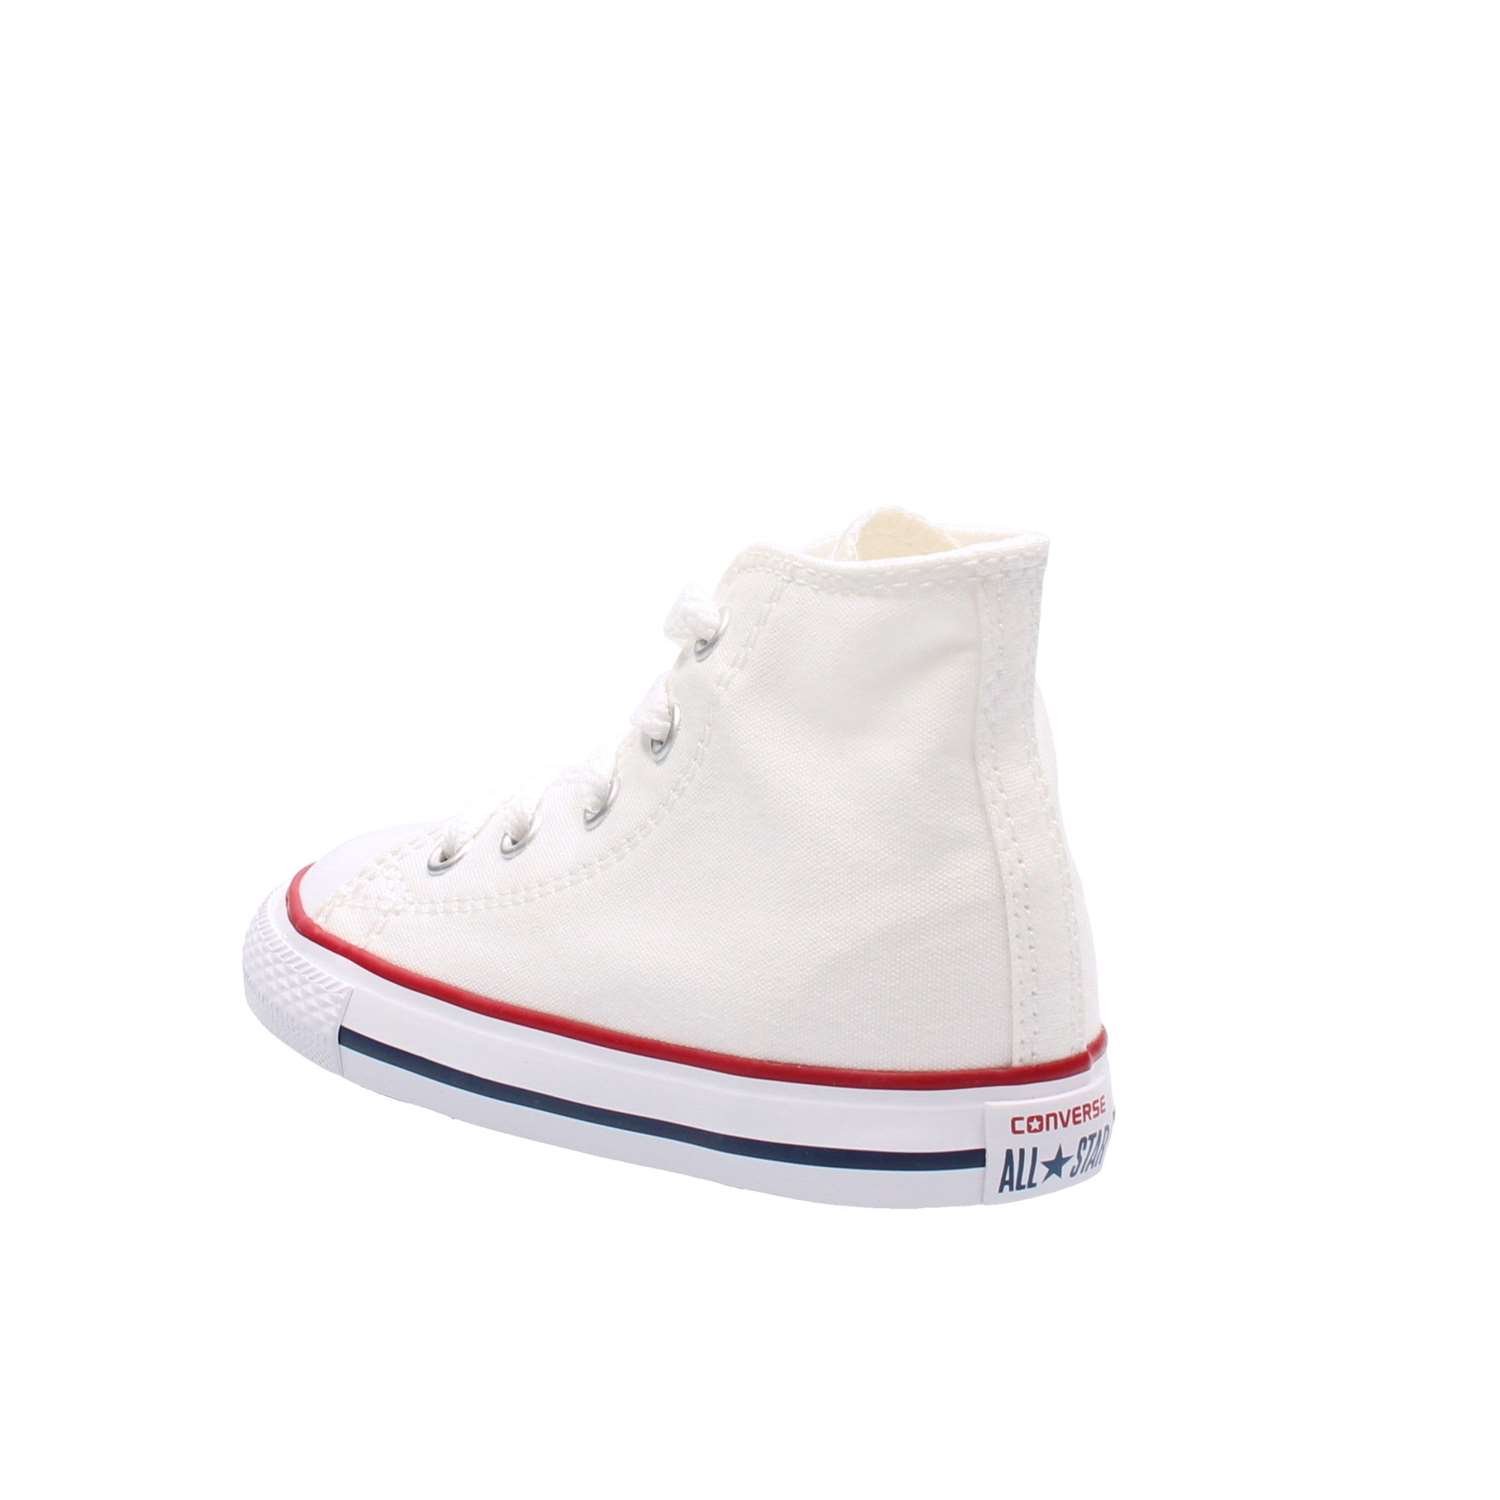 Converse Kids' Chuck Taylor All Star Canvas High Top Sneaker, Optical White, 8 M US Toddler